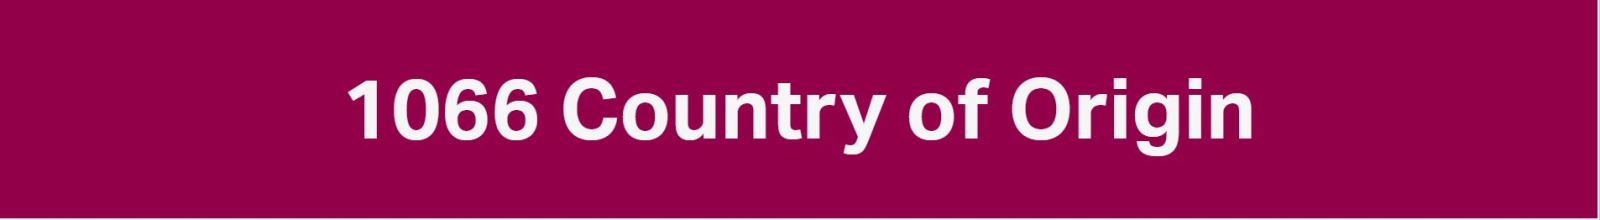 banner text saying 1066 country of origin